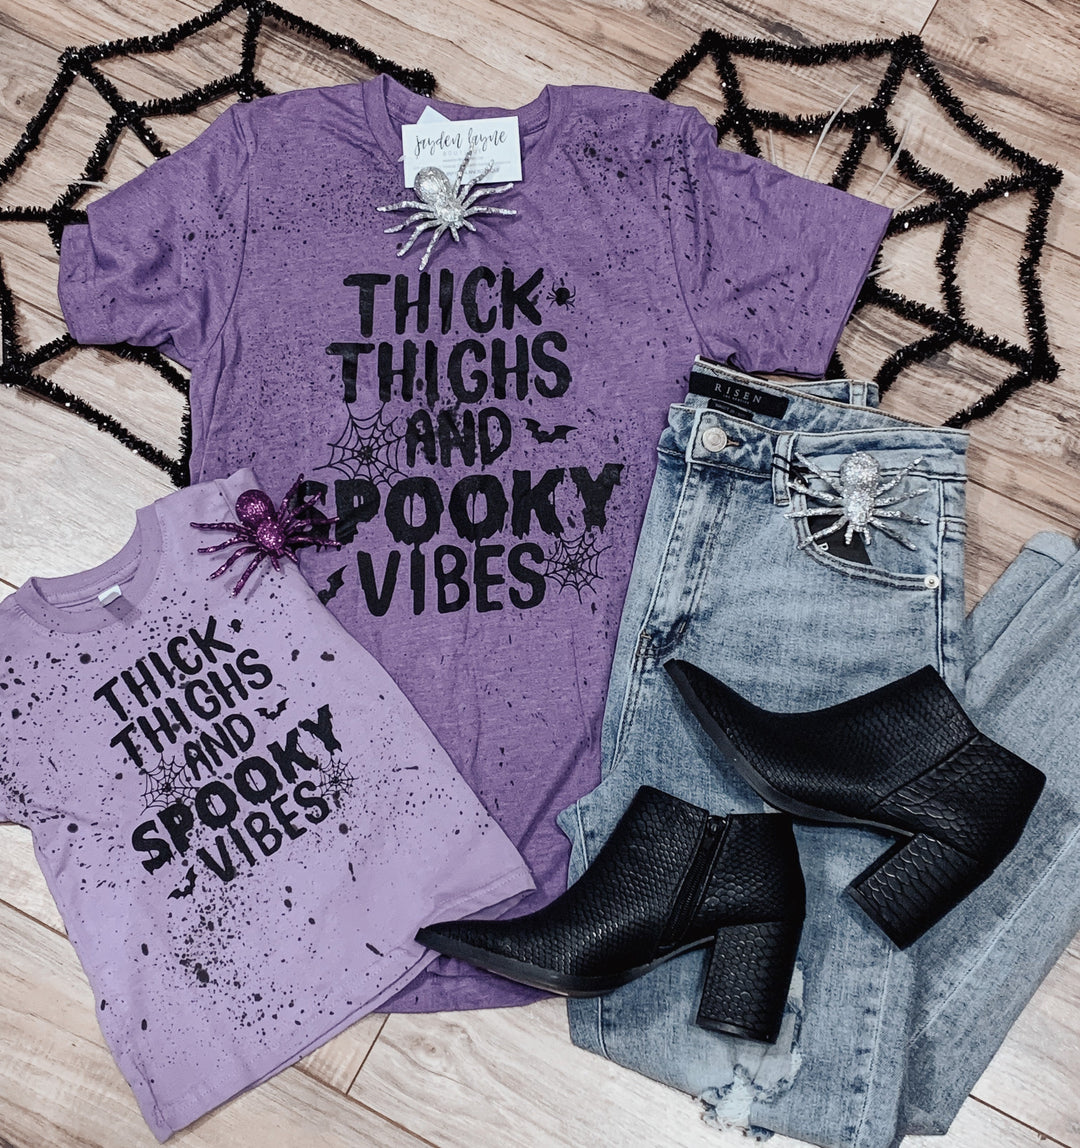 Thick thighs spooky vibes tee - Jayden Layne